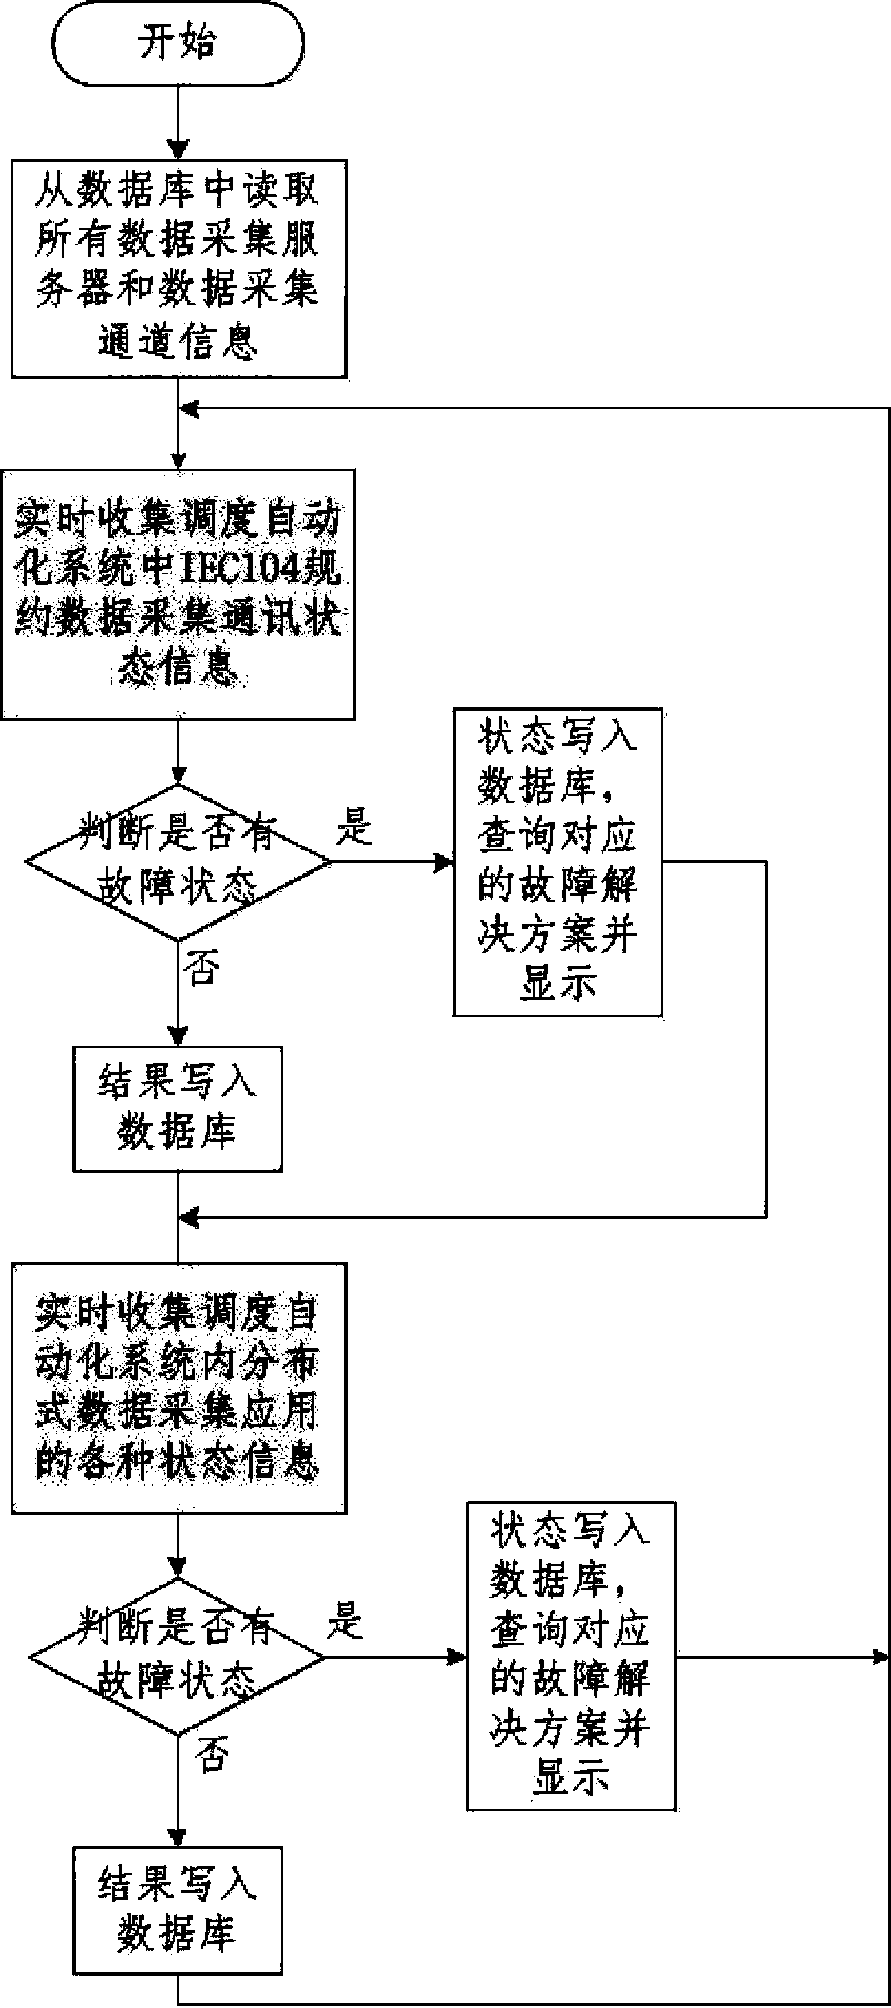 Intelligent diagnosis method for distributed data acquisition fault of dispatching automation system